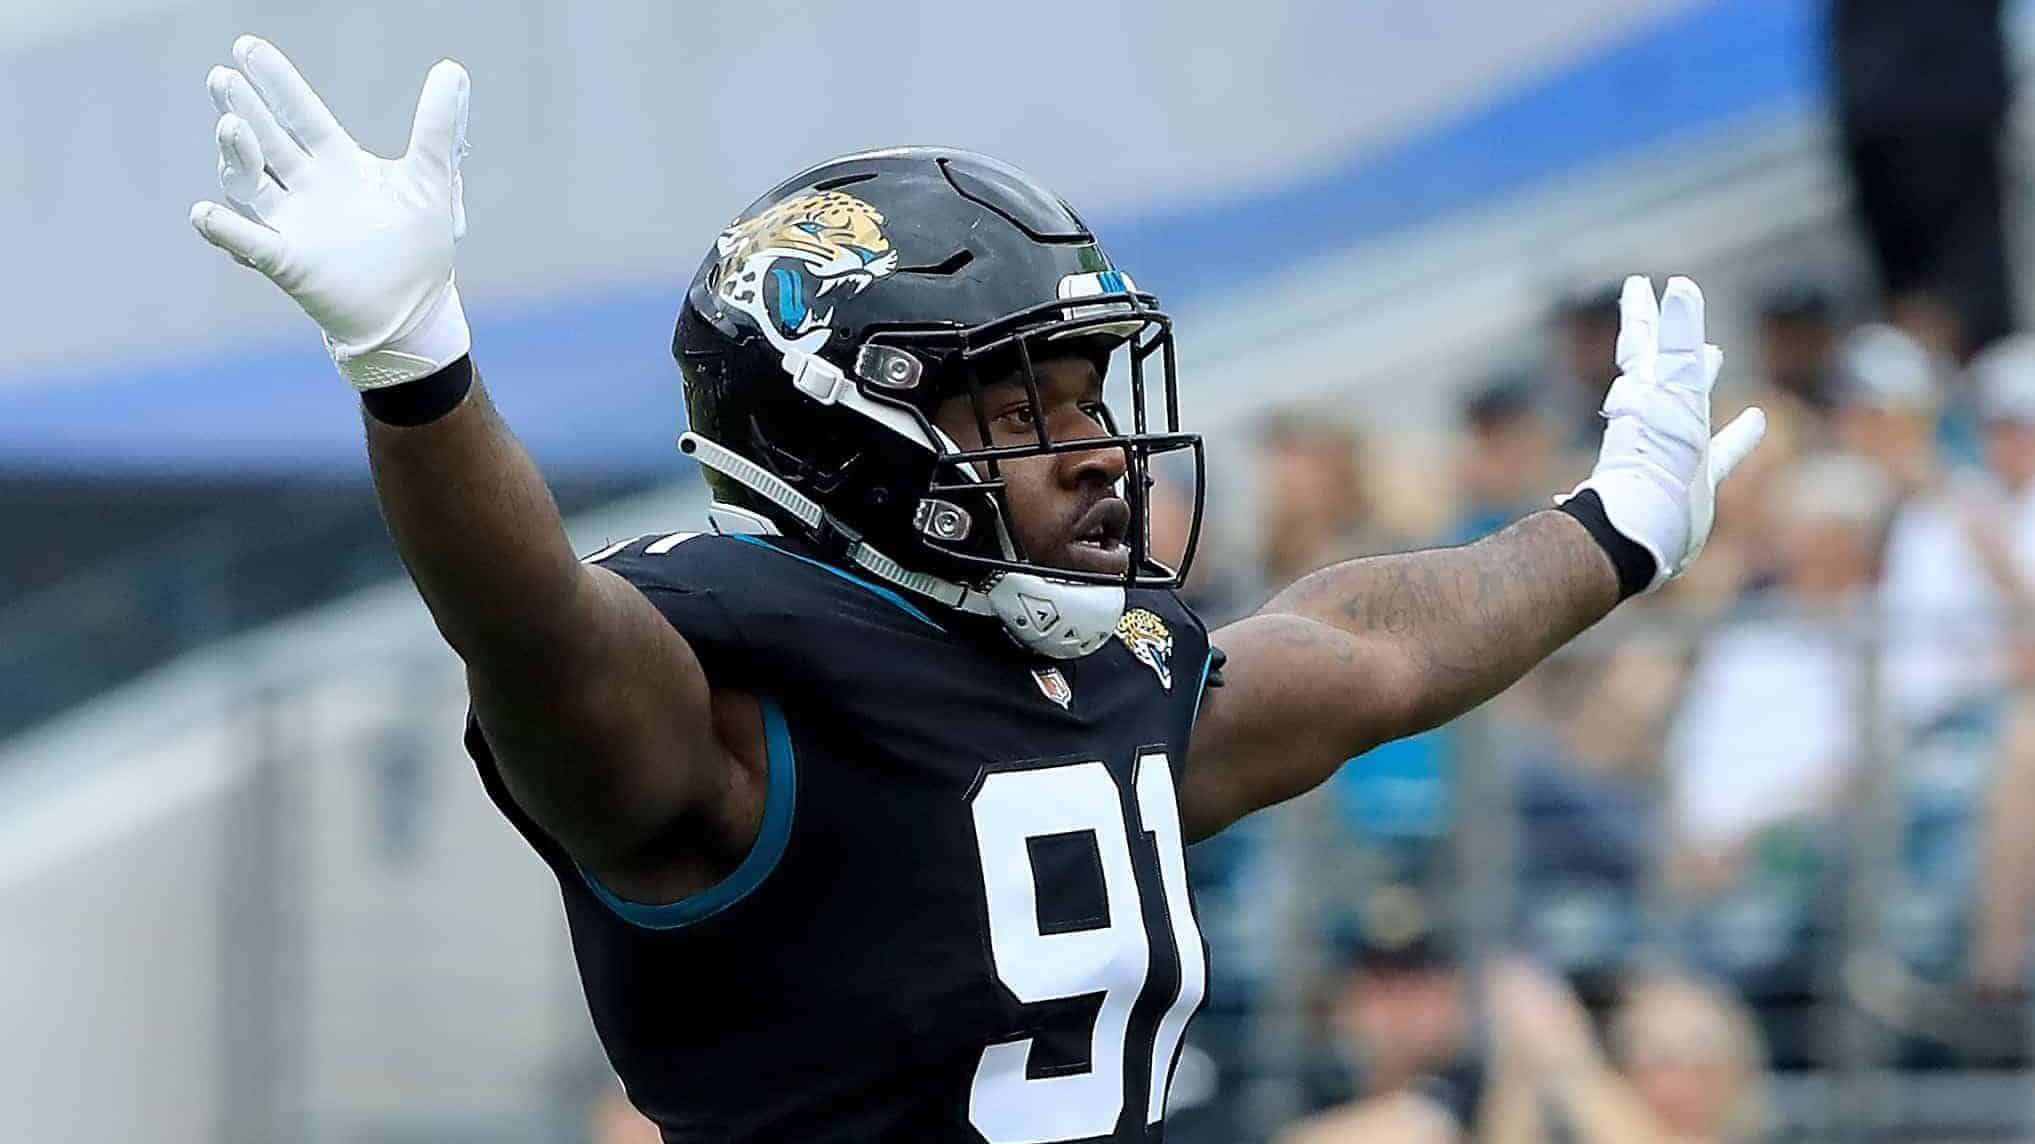 JACKSONVILLE, FLORIDA - DECEMBER 02: Yannick Ngakoue #91 of the Jacksonville Jaguars celebrates a defensive stop during the game against the Indianapolis Colts on December 02, 2018 in Jacksonville, Florida.